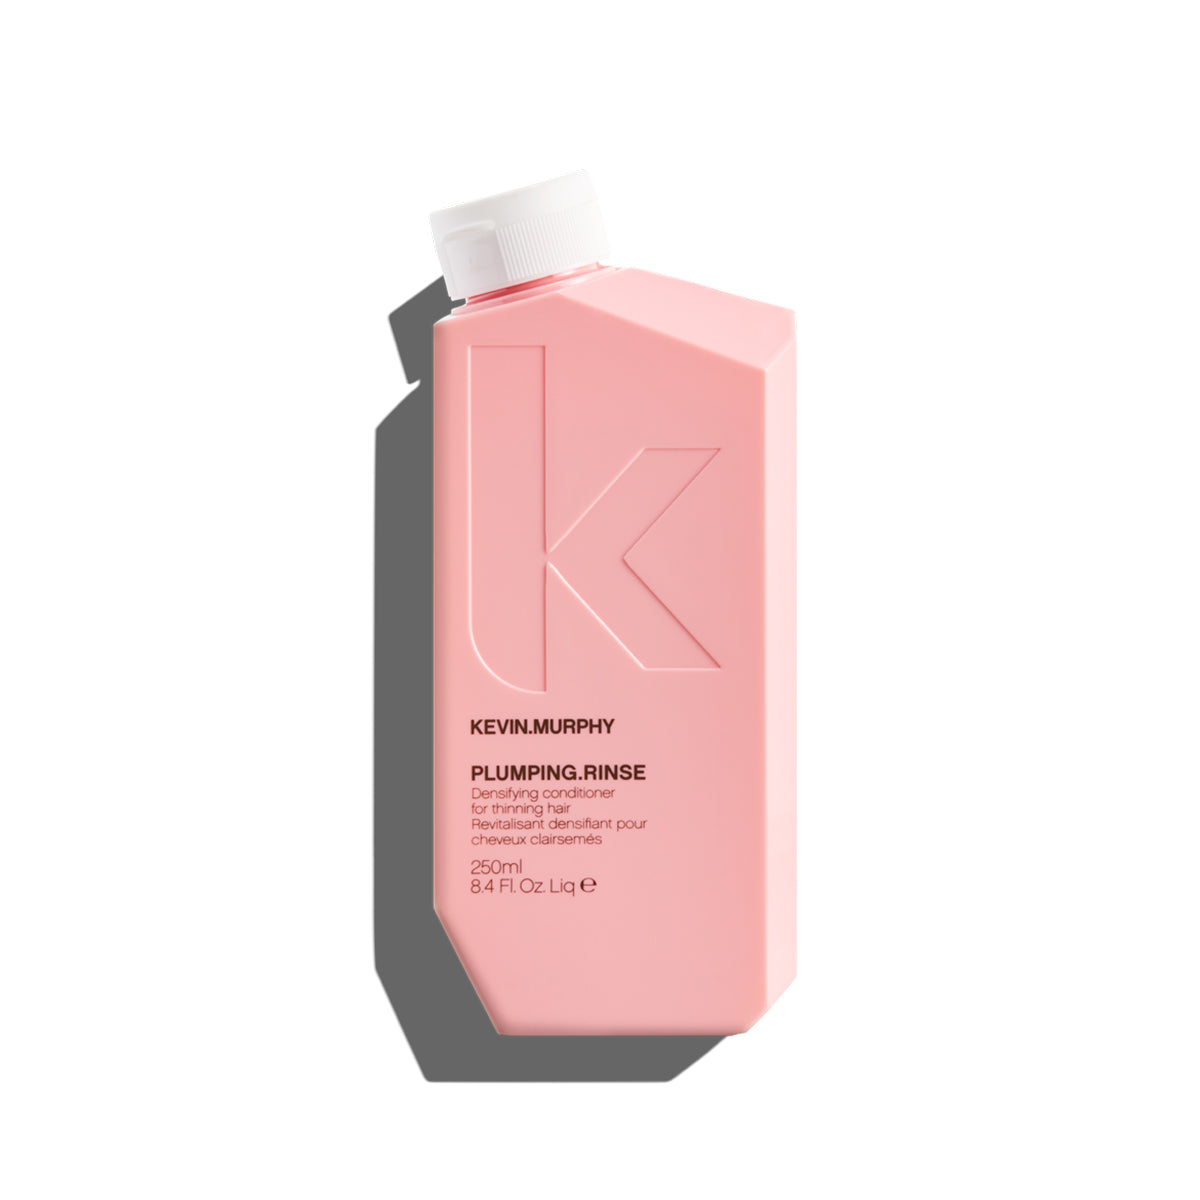 Plumping Rinse Conditioner